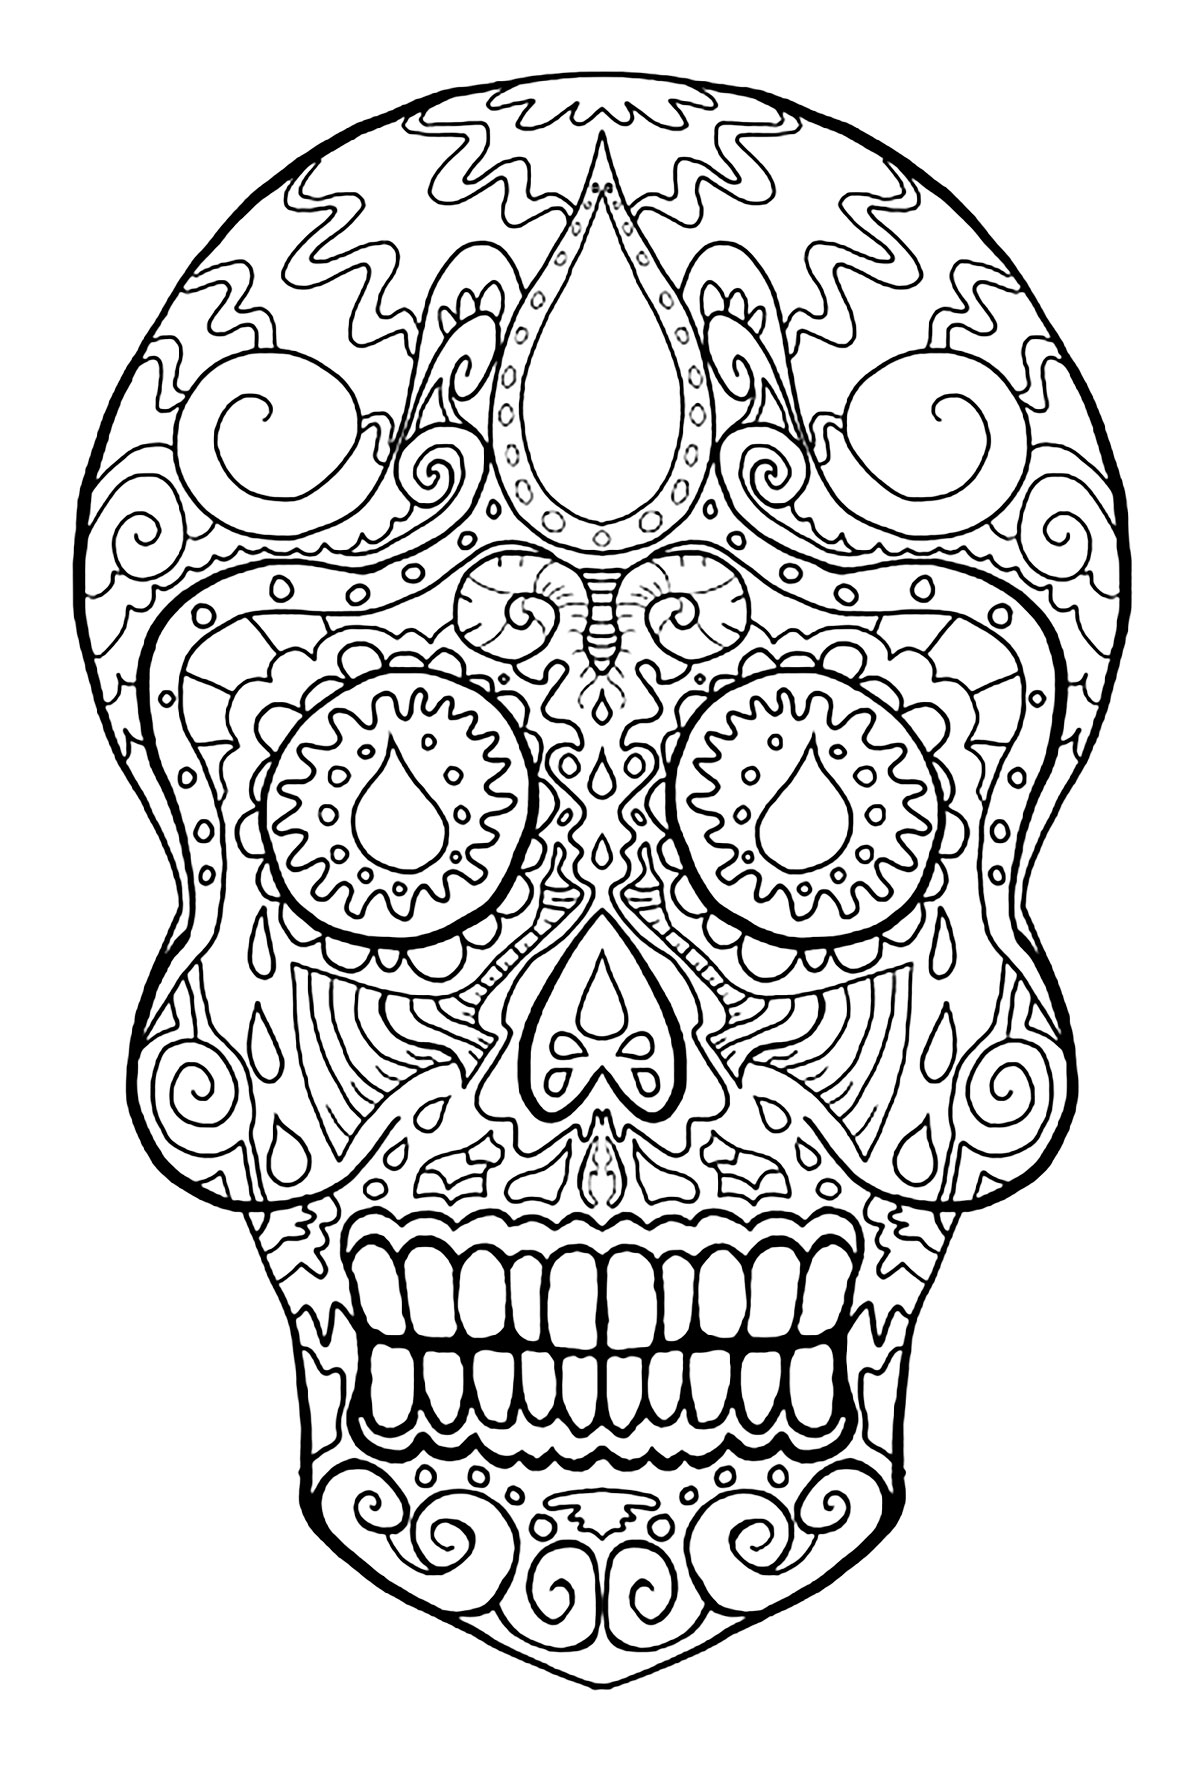 Download Skull Coloring Pages For Adults